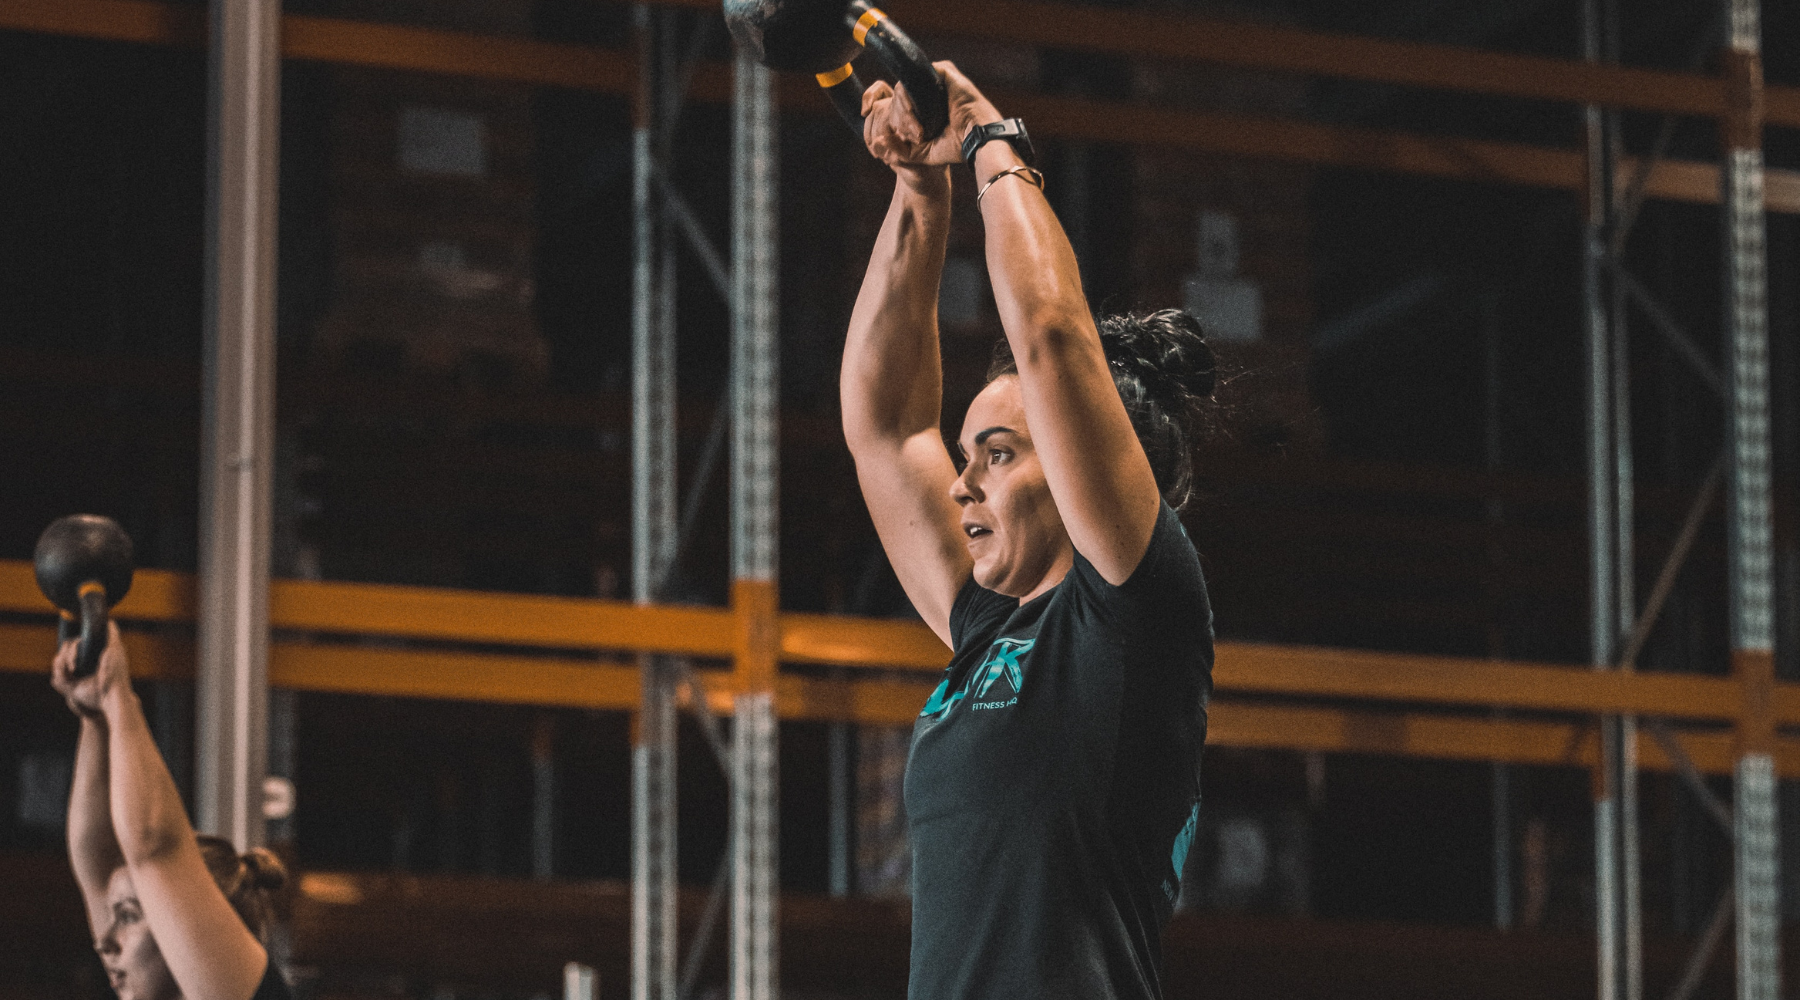 Army Capt. Dan Whitten CrossFit Hero Daniel WOD Workout -redbaysand womens activewear, gym clothing and fitness athleisure